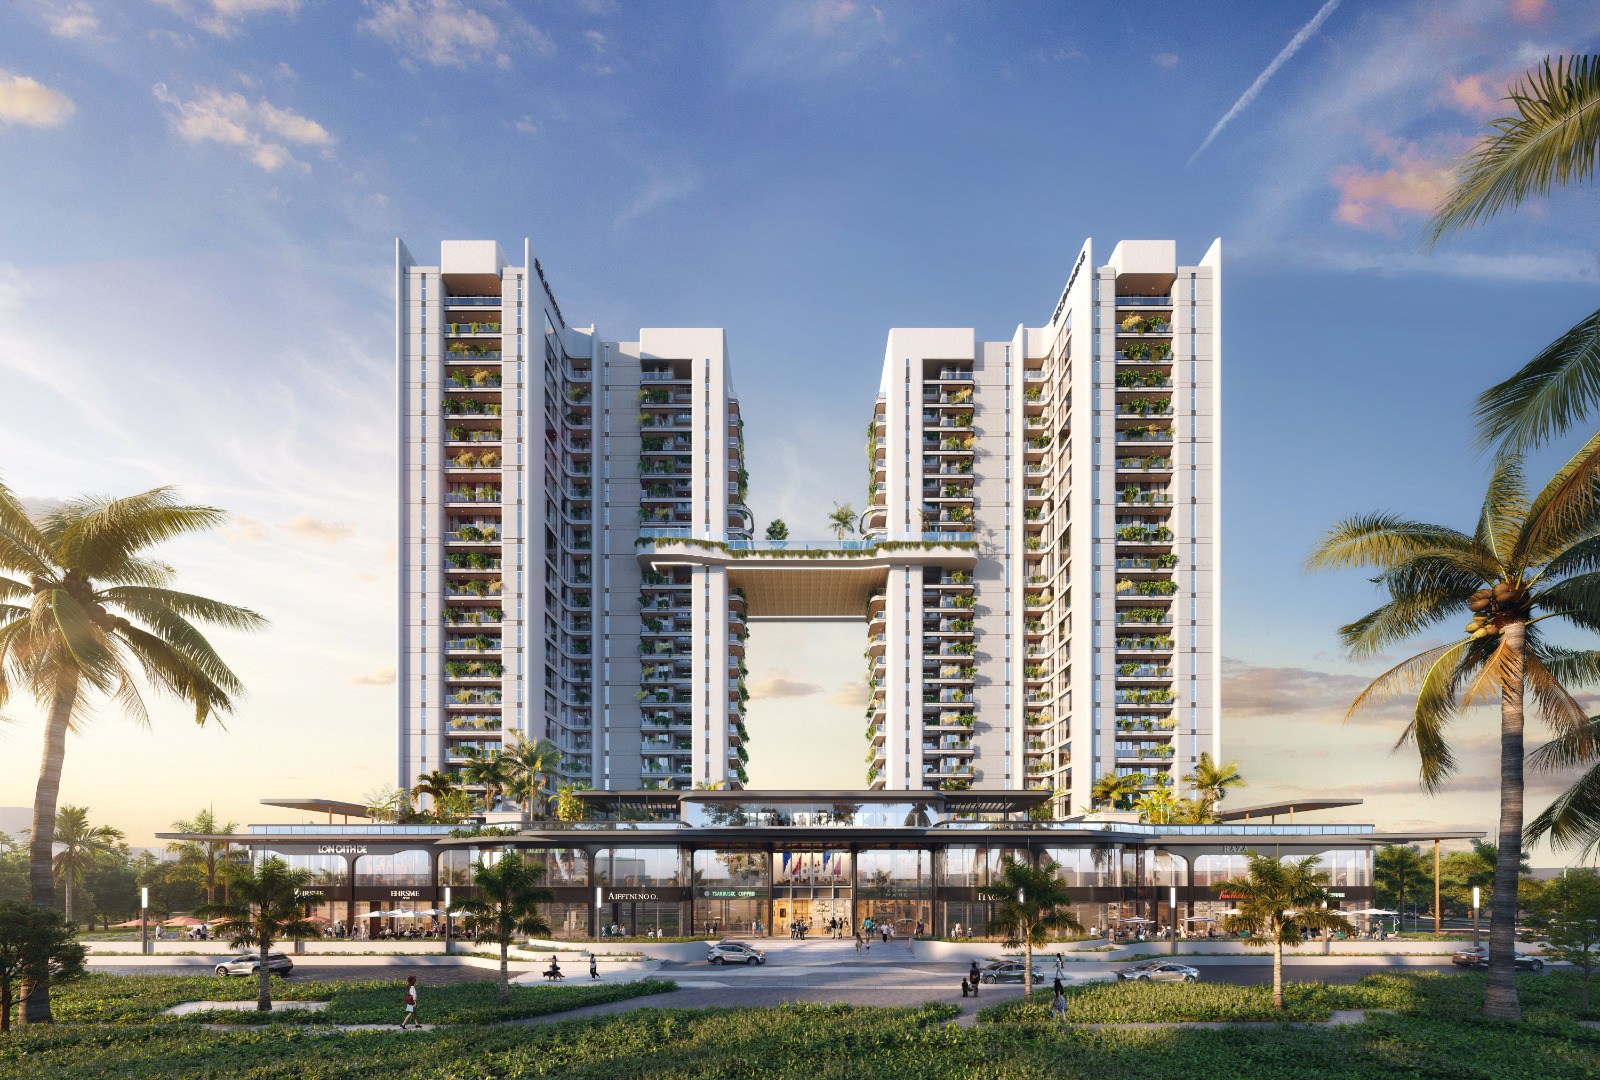 Shalimar Sky Garden is the latest offering by the epitome of real estate, Shalimar Corp